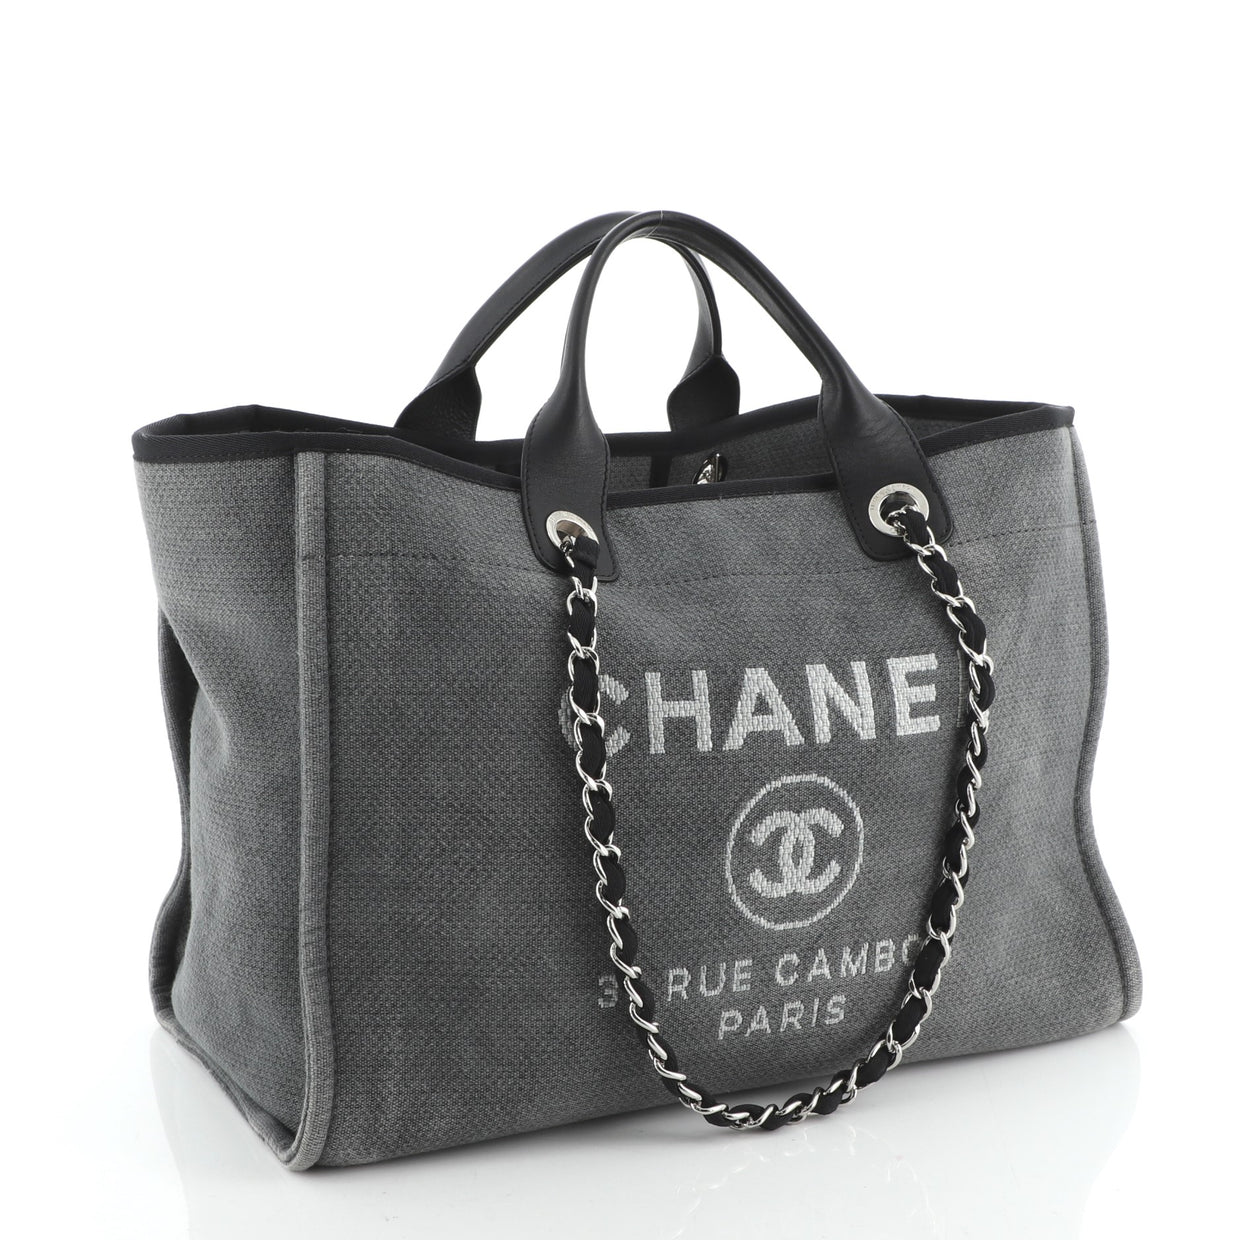 Chanel Deauville Tote Canvas Large - Rebag